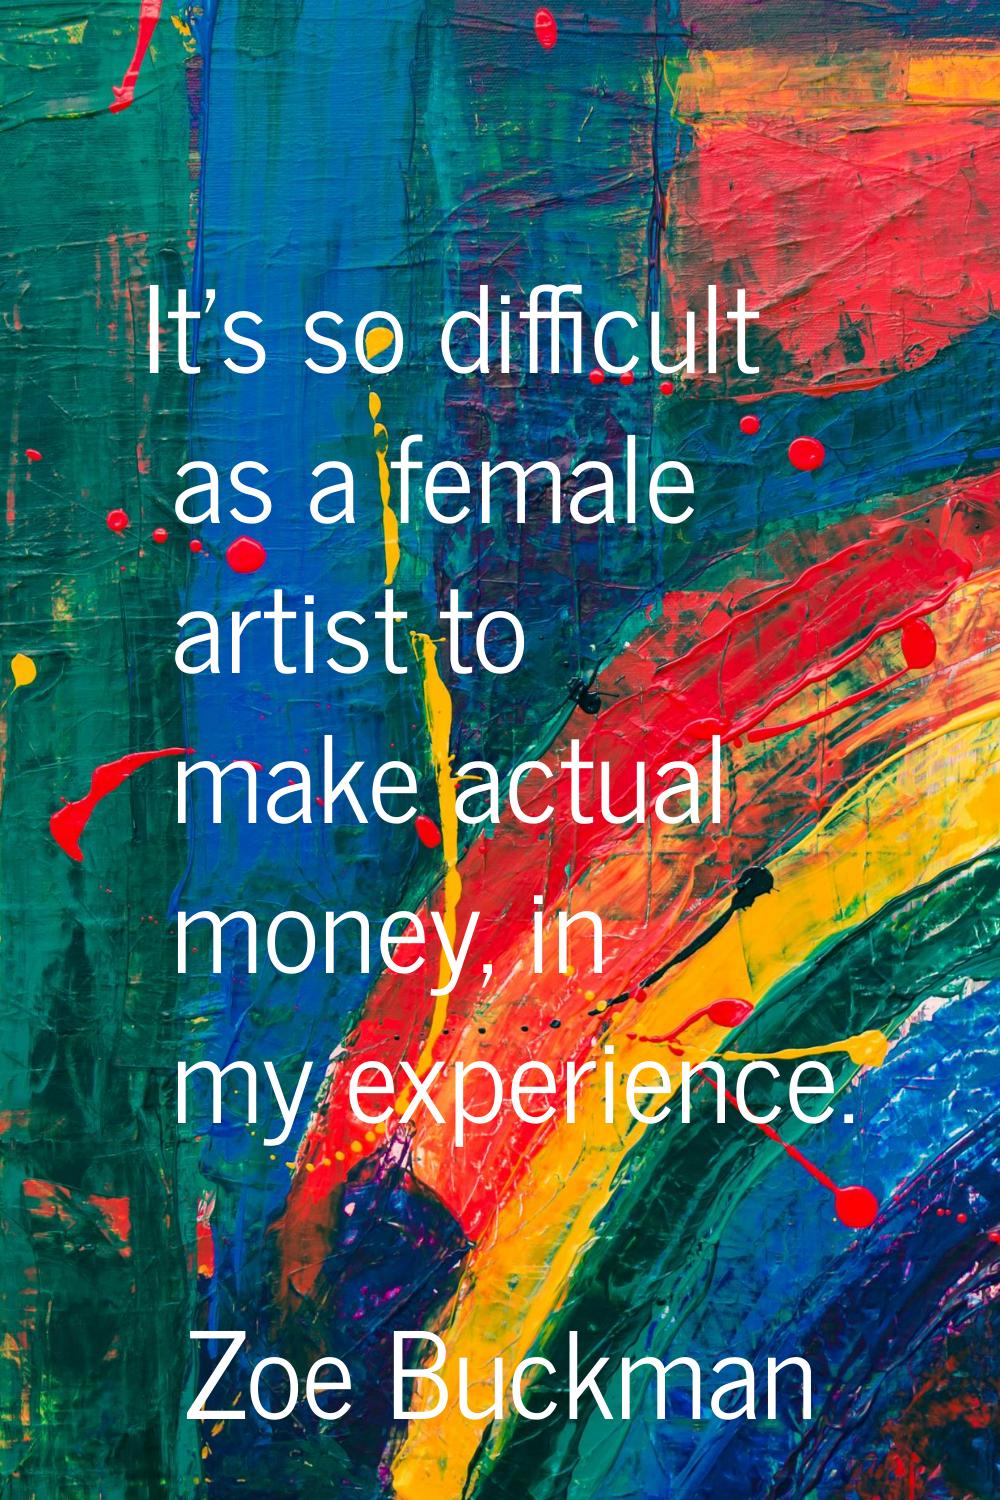 It's so difficult as a female artist to make actual money, in my experience.